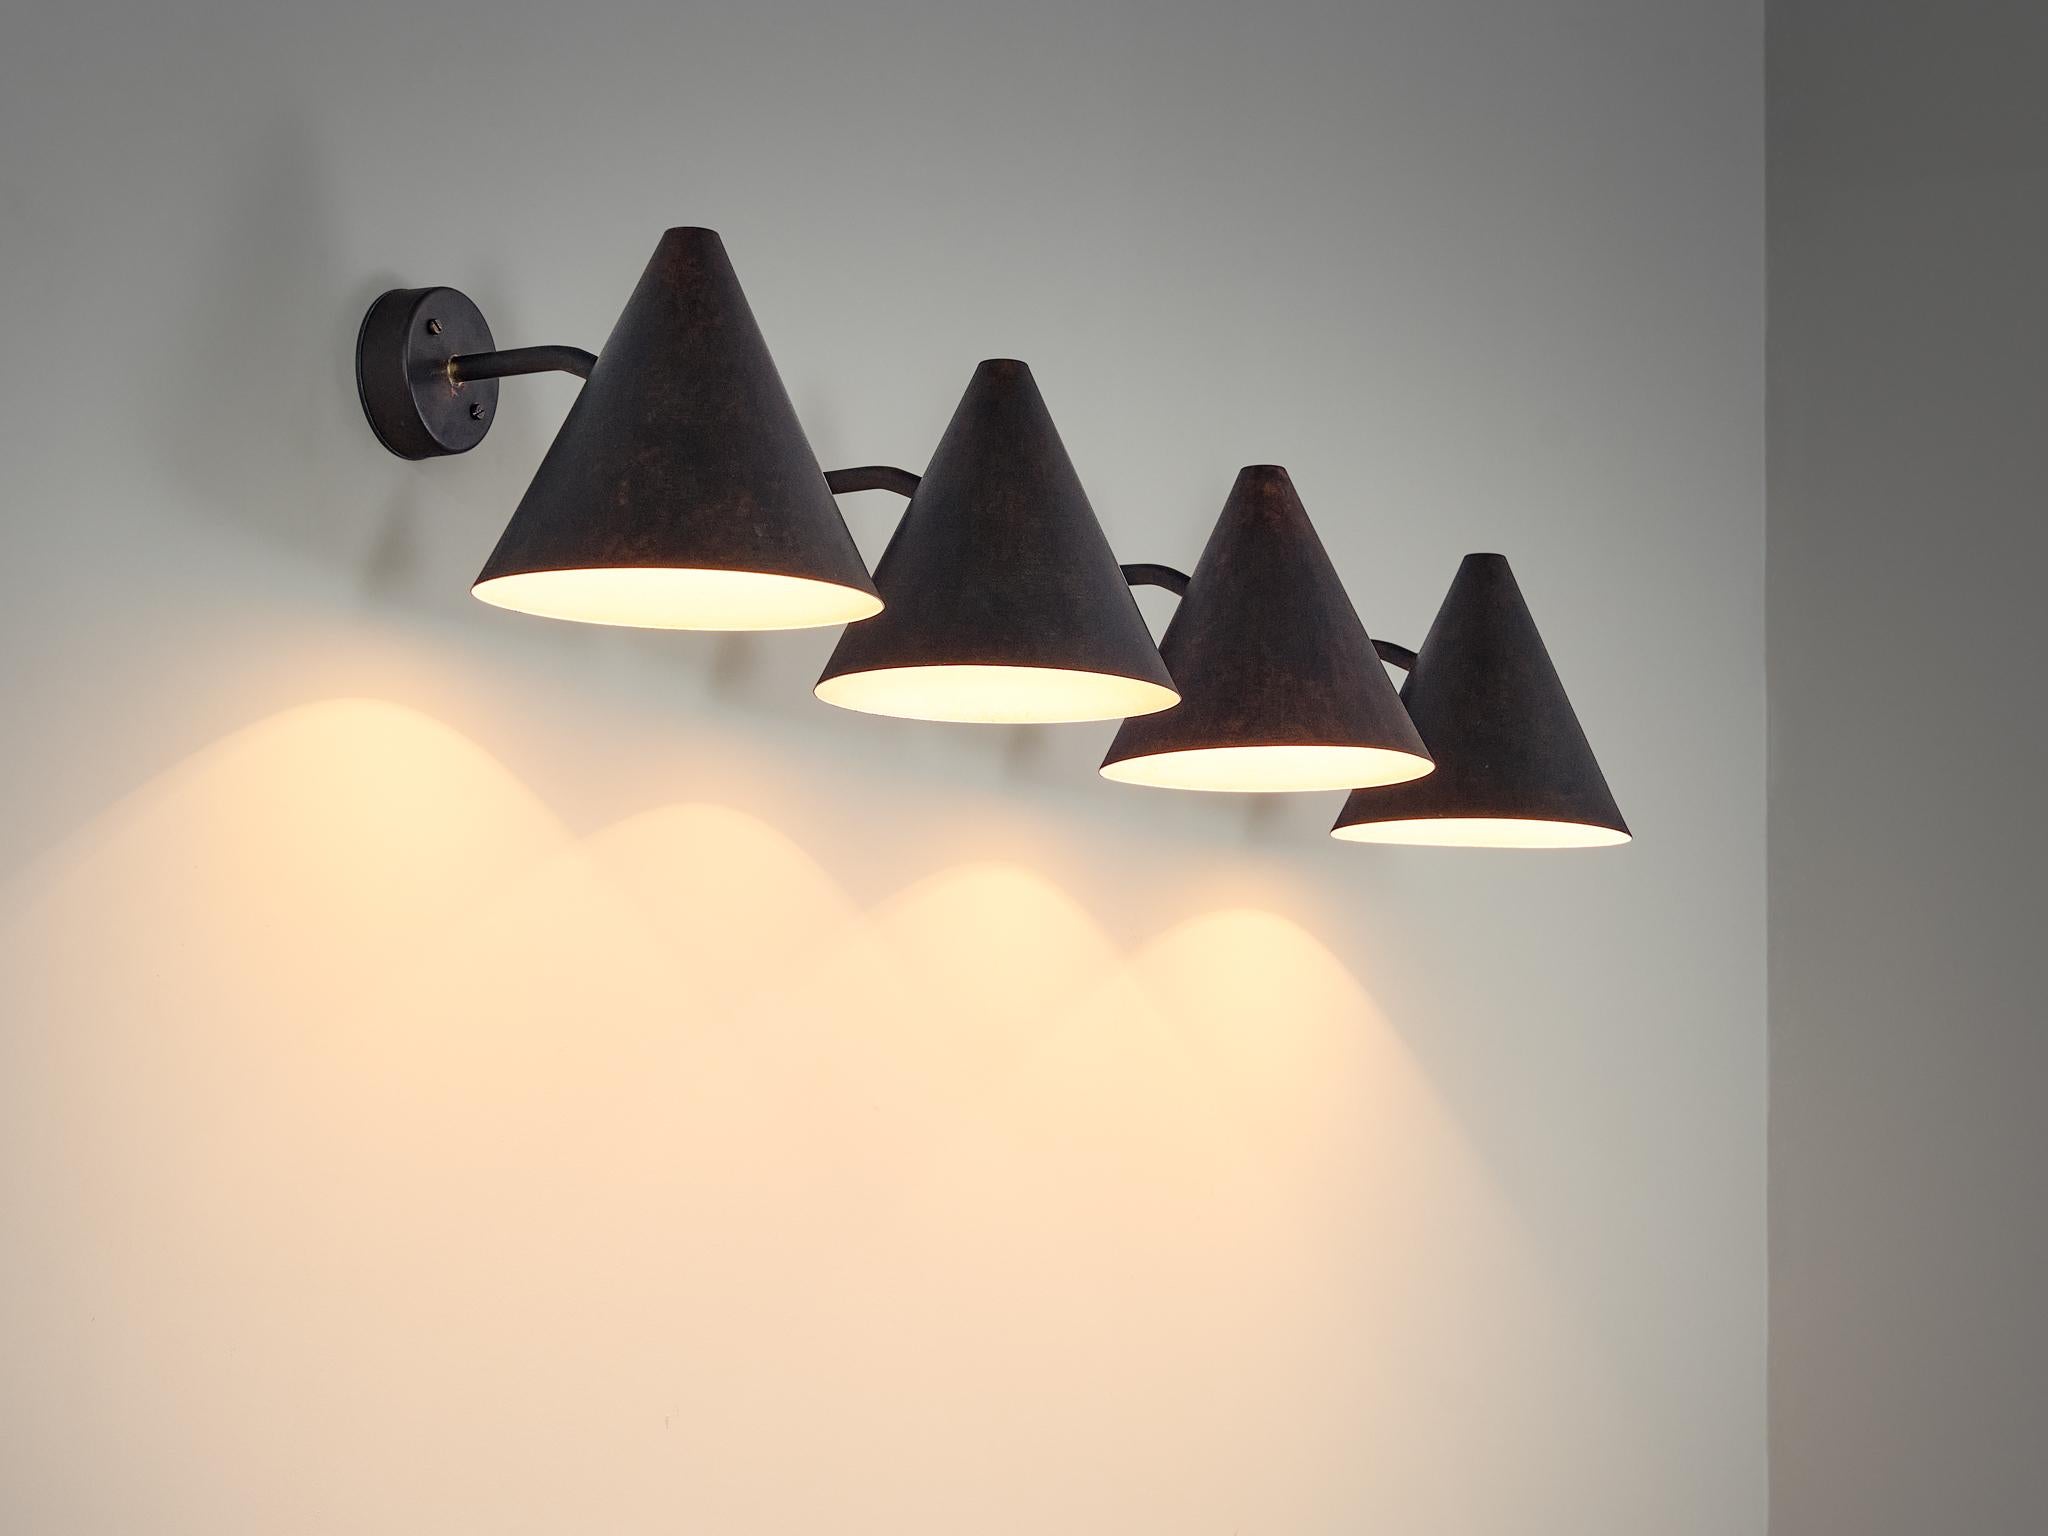 Hans-Agne Jakobsson for Hans-Agne Jakobsson AB in Markaryd, wall lights ‘Tratten’, copper, Sweden, 1950s

Hans-Agne Jakobsson designed this wall light 'Tratten', which is crafted from green copper. The conical-shaped shade is secured to a slightly